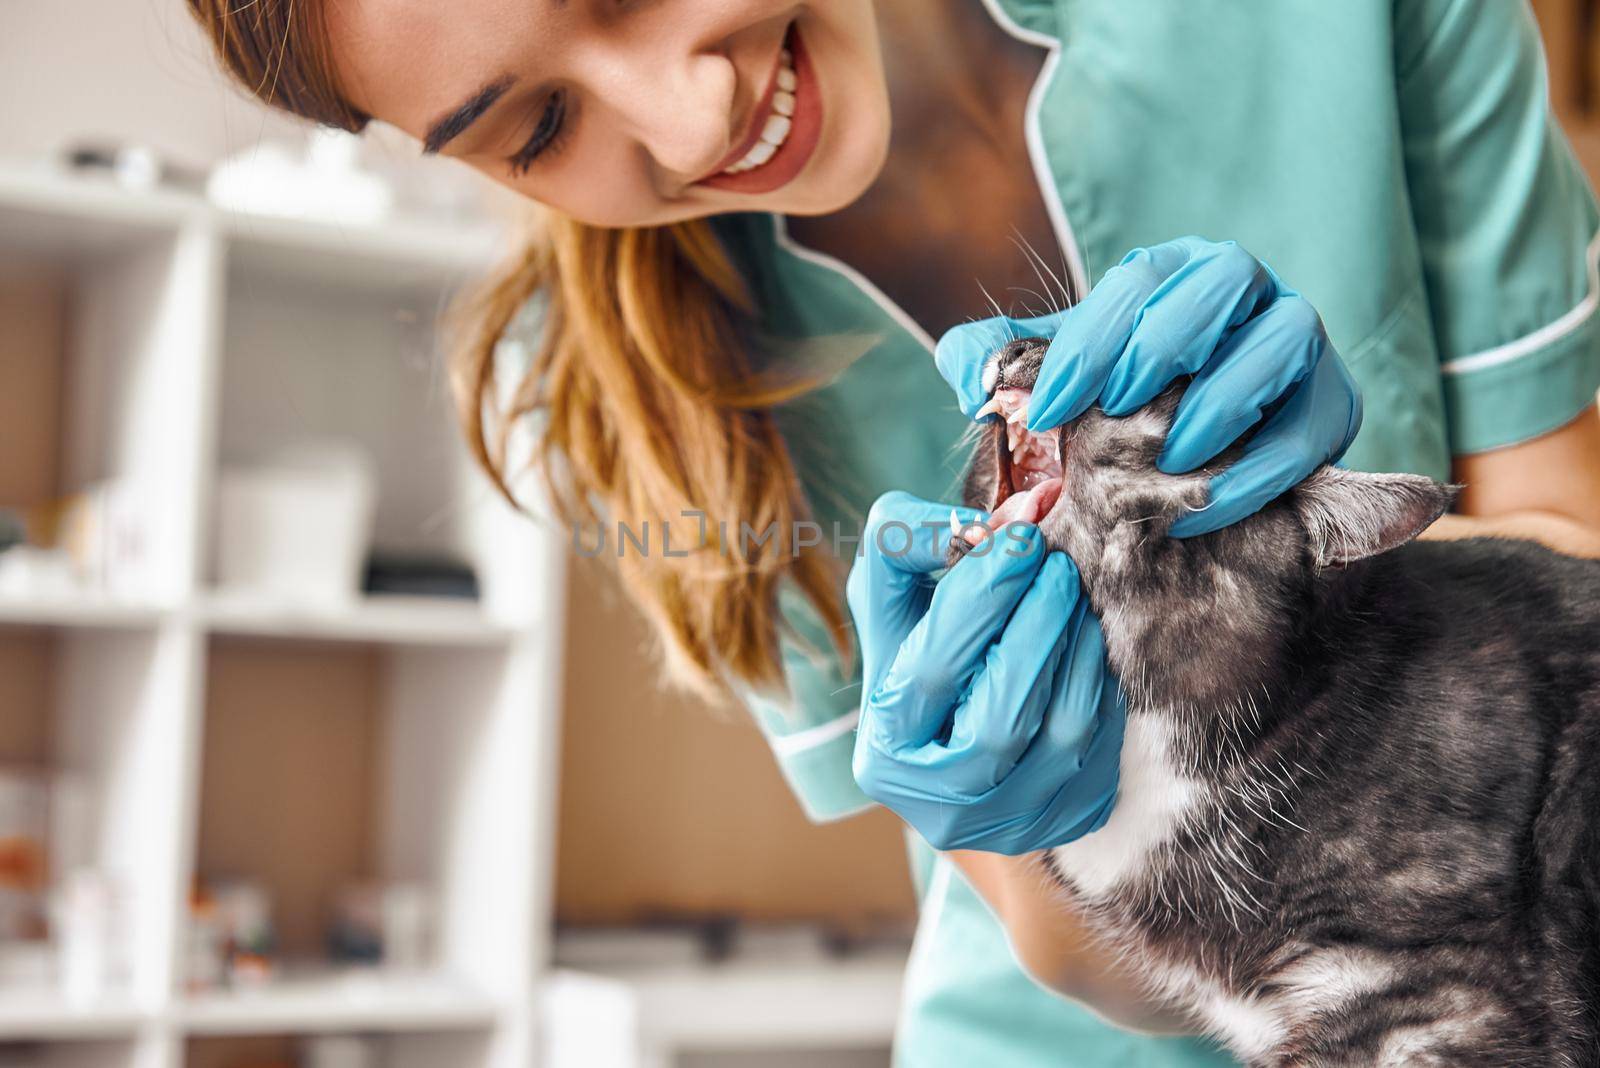 Is everything alright Young female veterinarian in work uniform is checking teeth of a fluffy black cat in veterinary clinic. Pet care concept by friendsstock